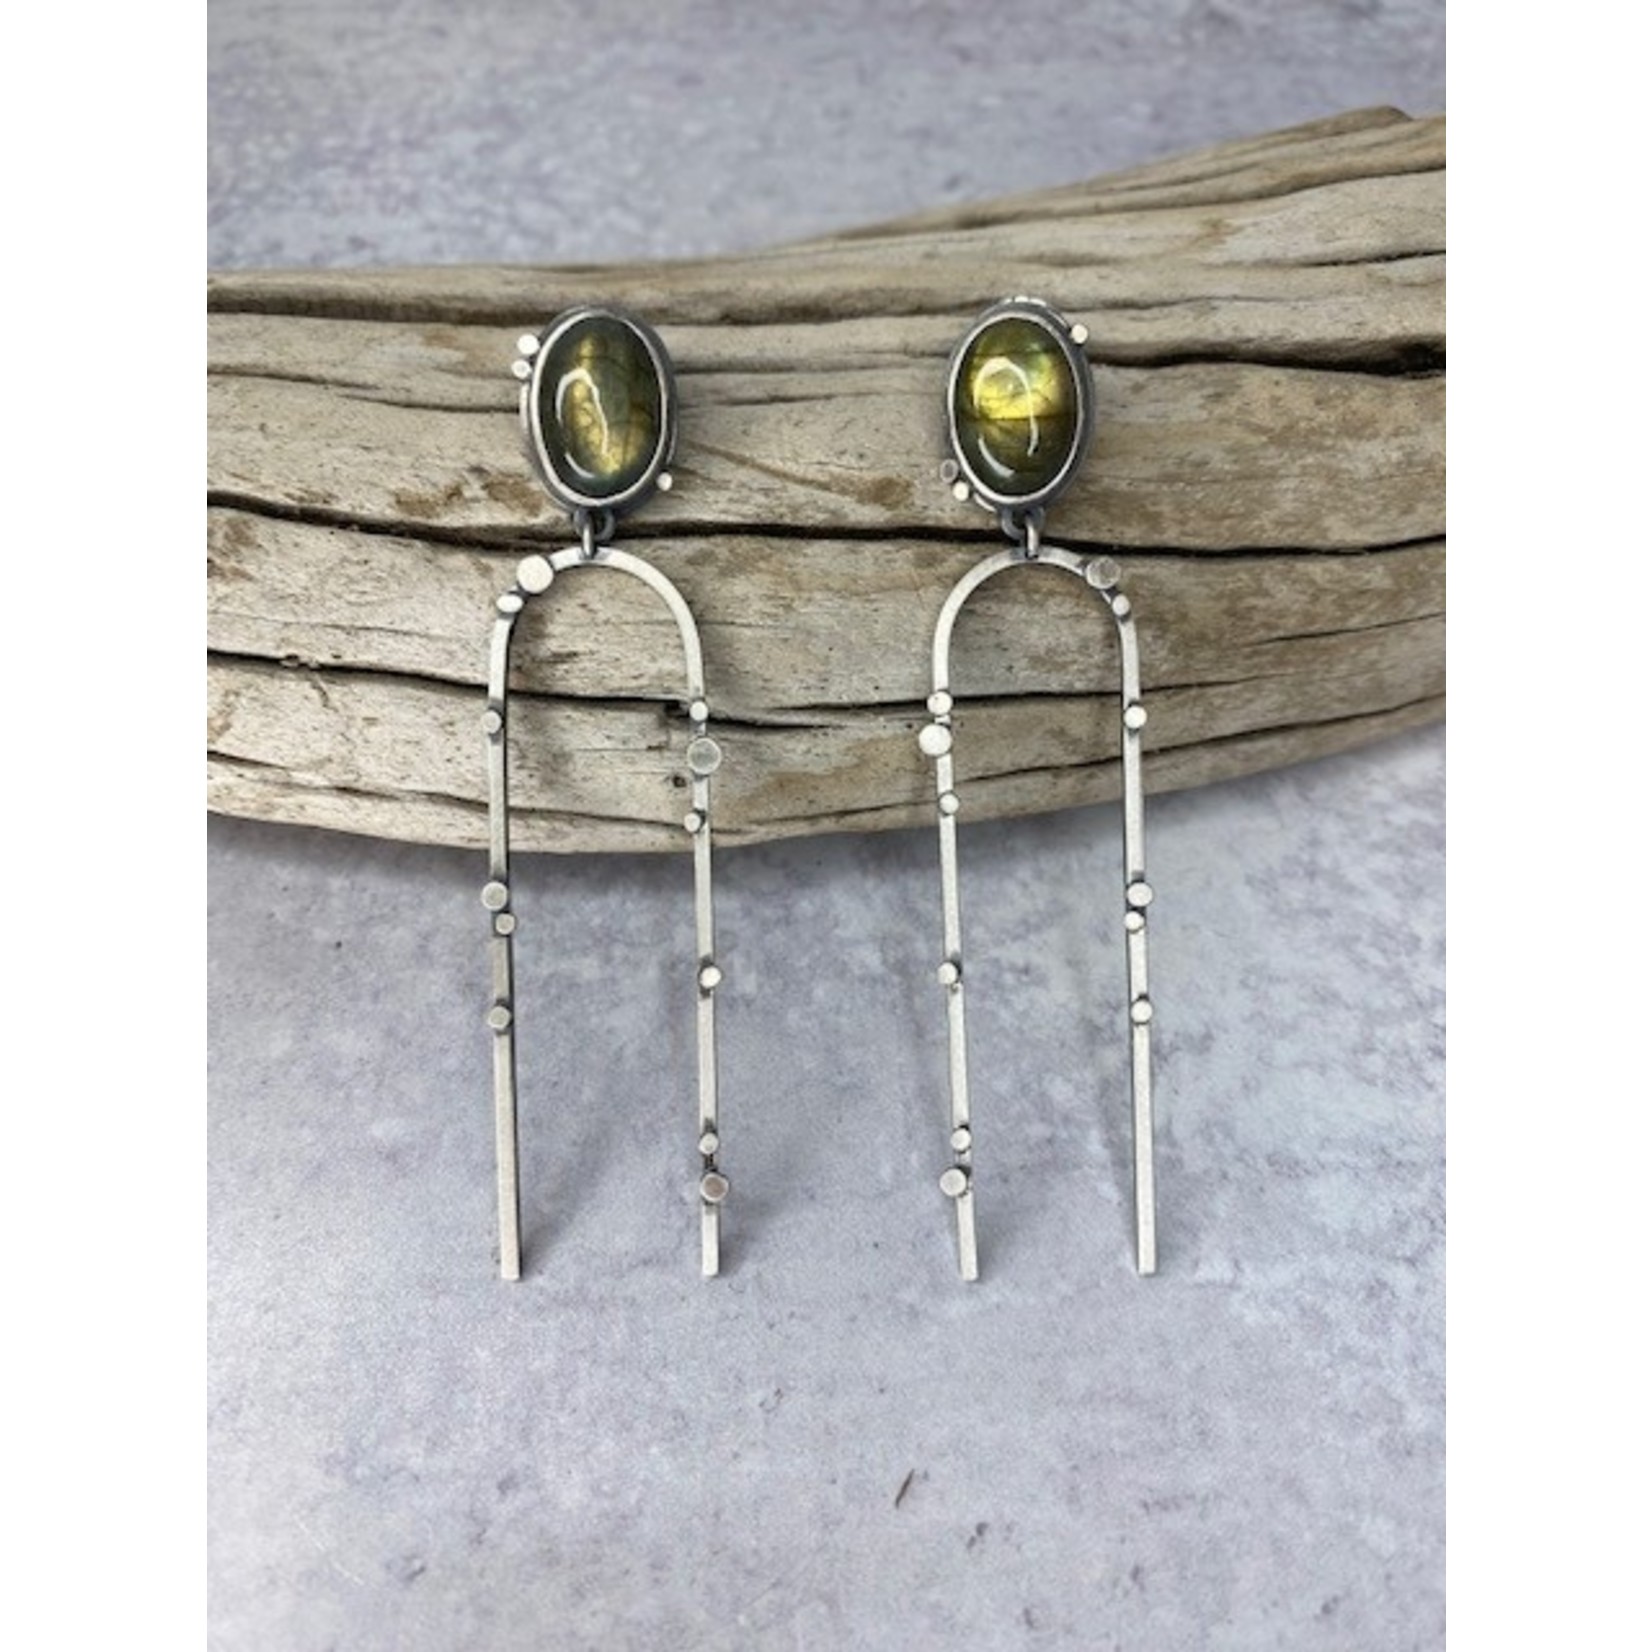 QUENCH METALWORKS Galaxy Fork Earrings - Labradorite